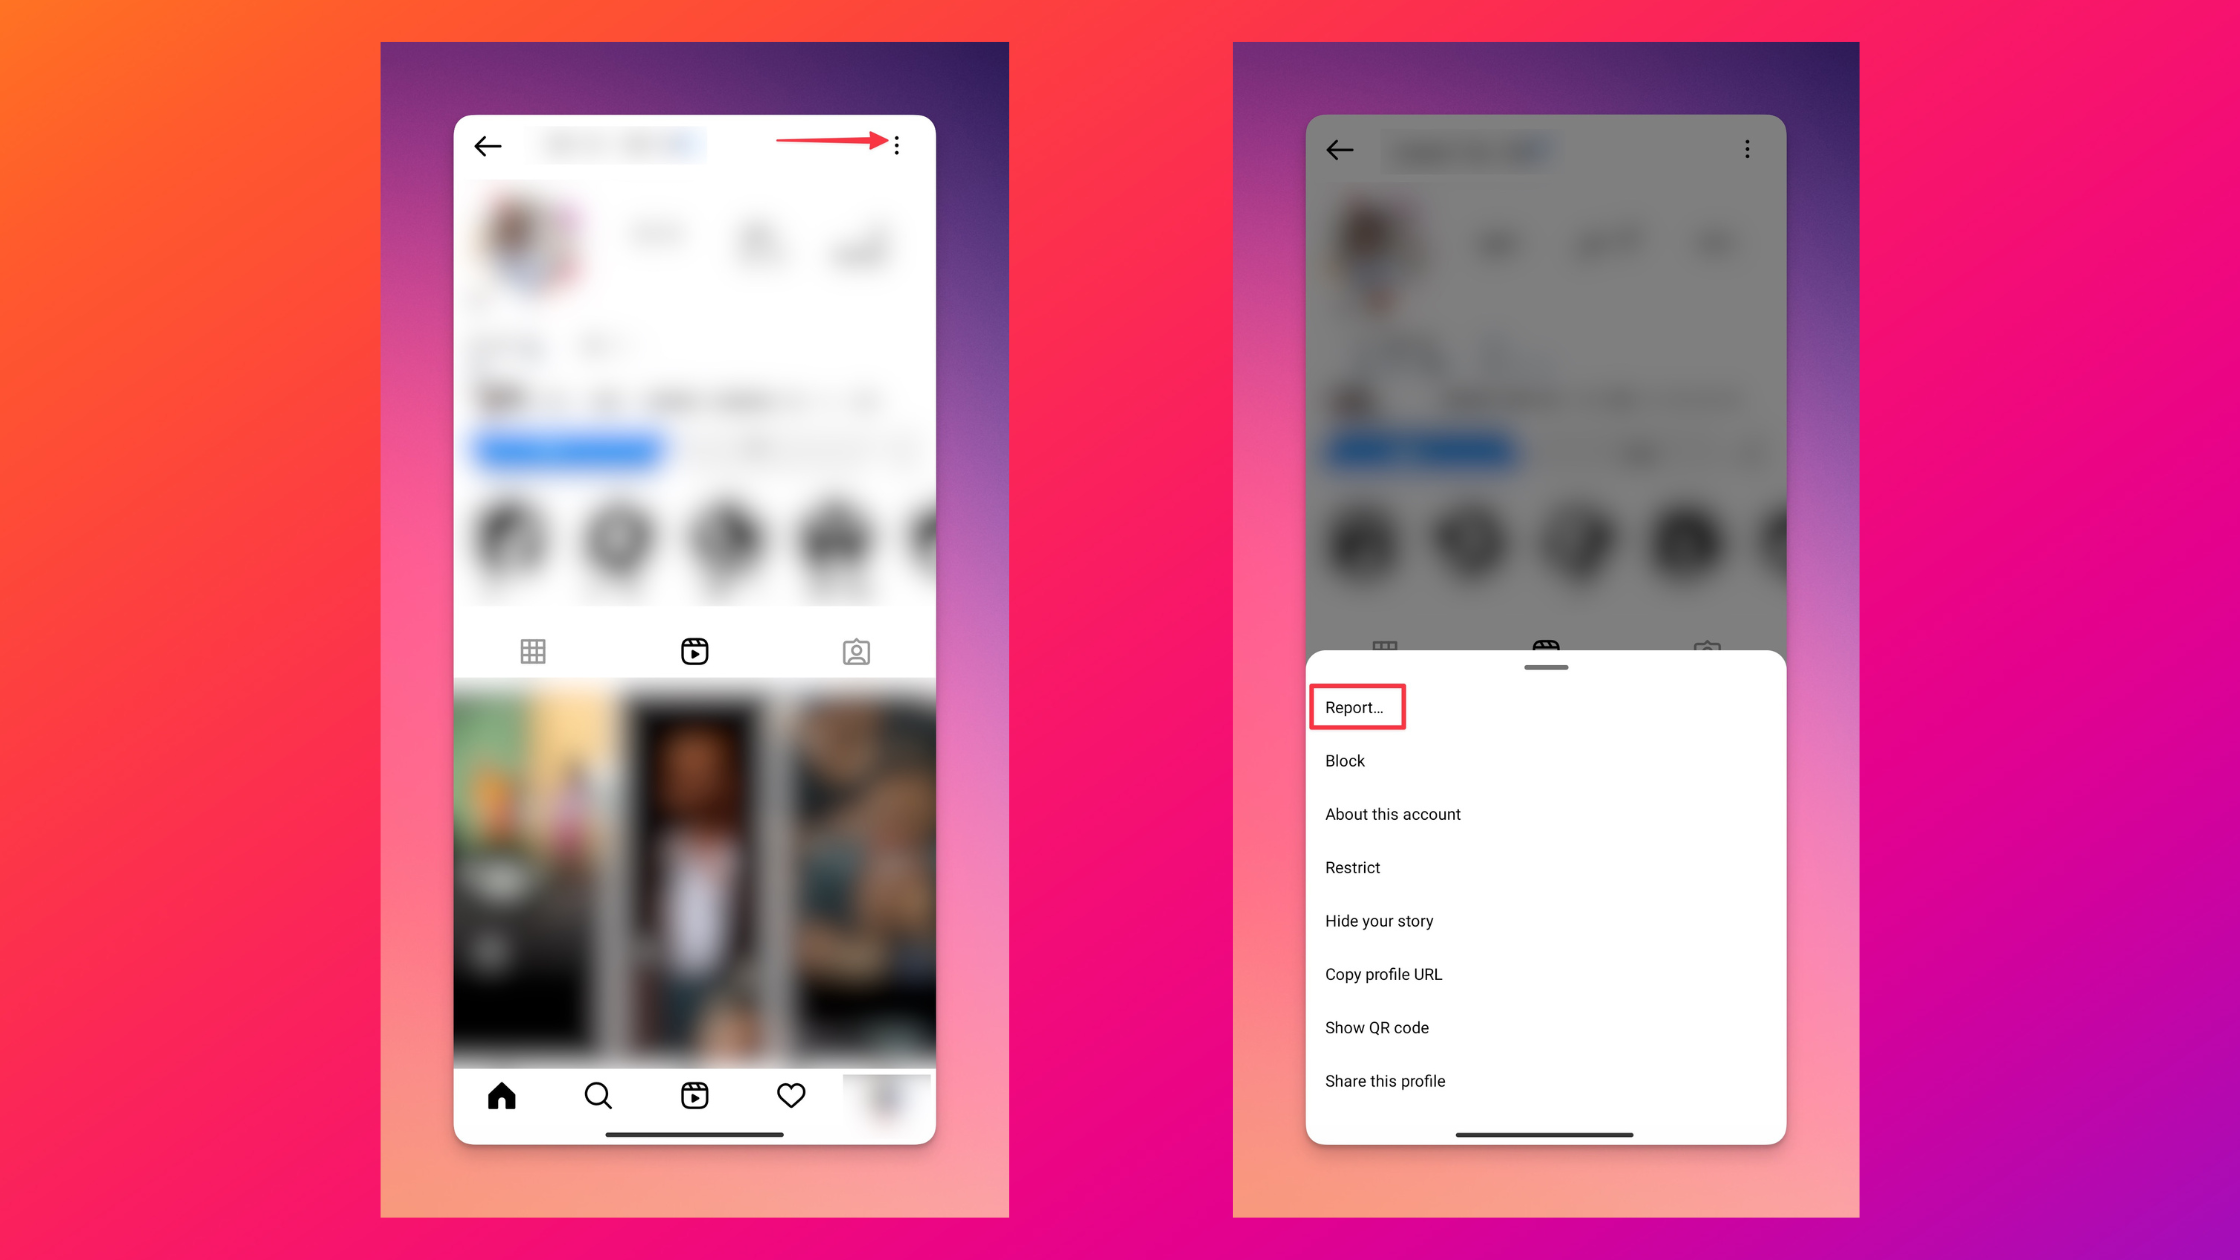 Remote.tools shows how to report a profile on Instagram